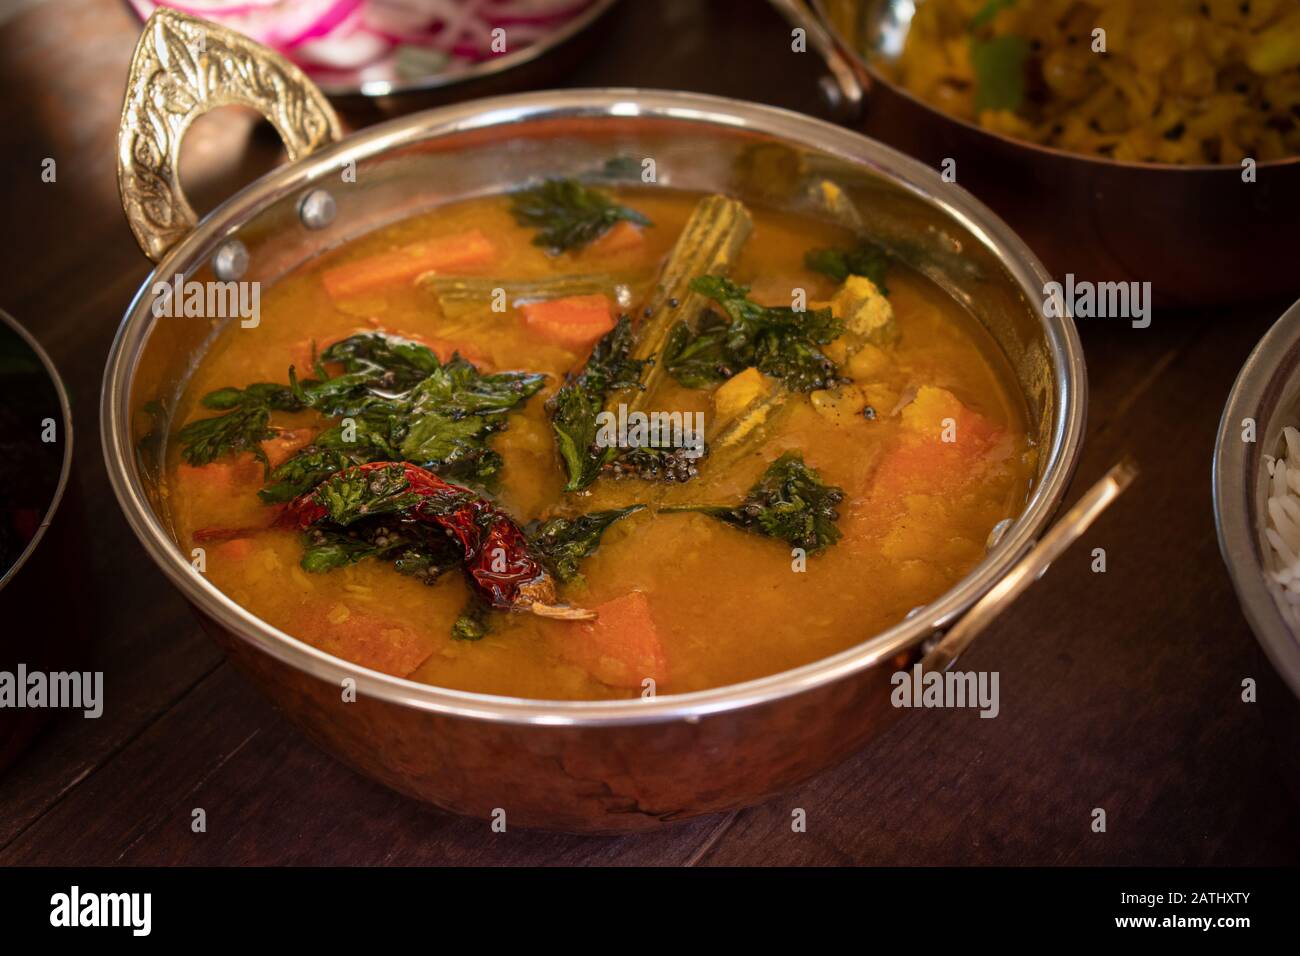 Sambar- south Indian lentil and vegetables spicy stew Stock Photo